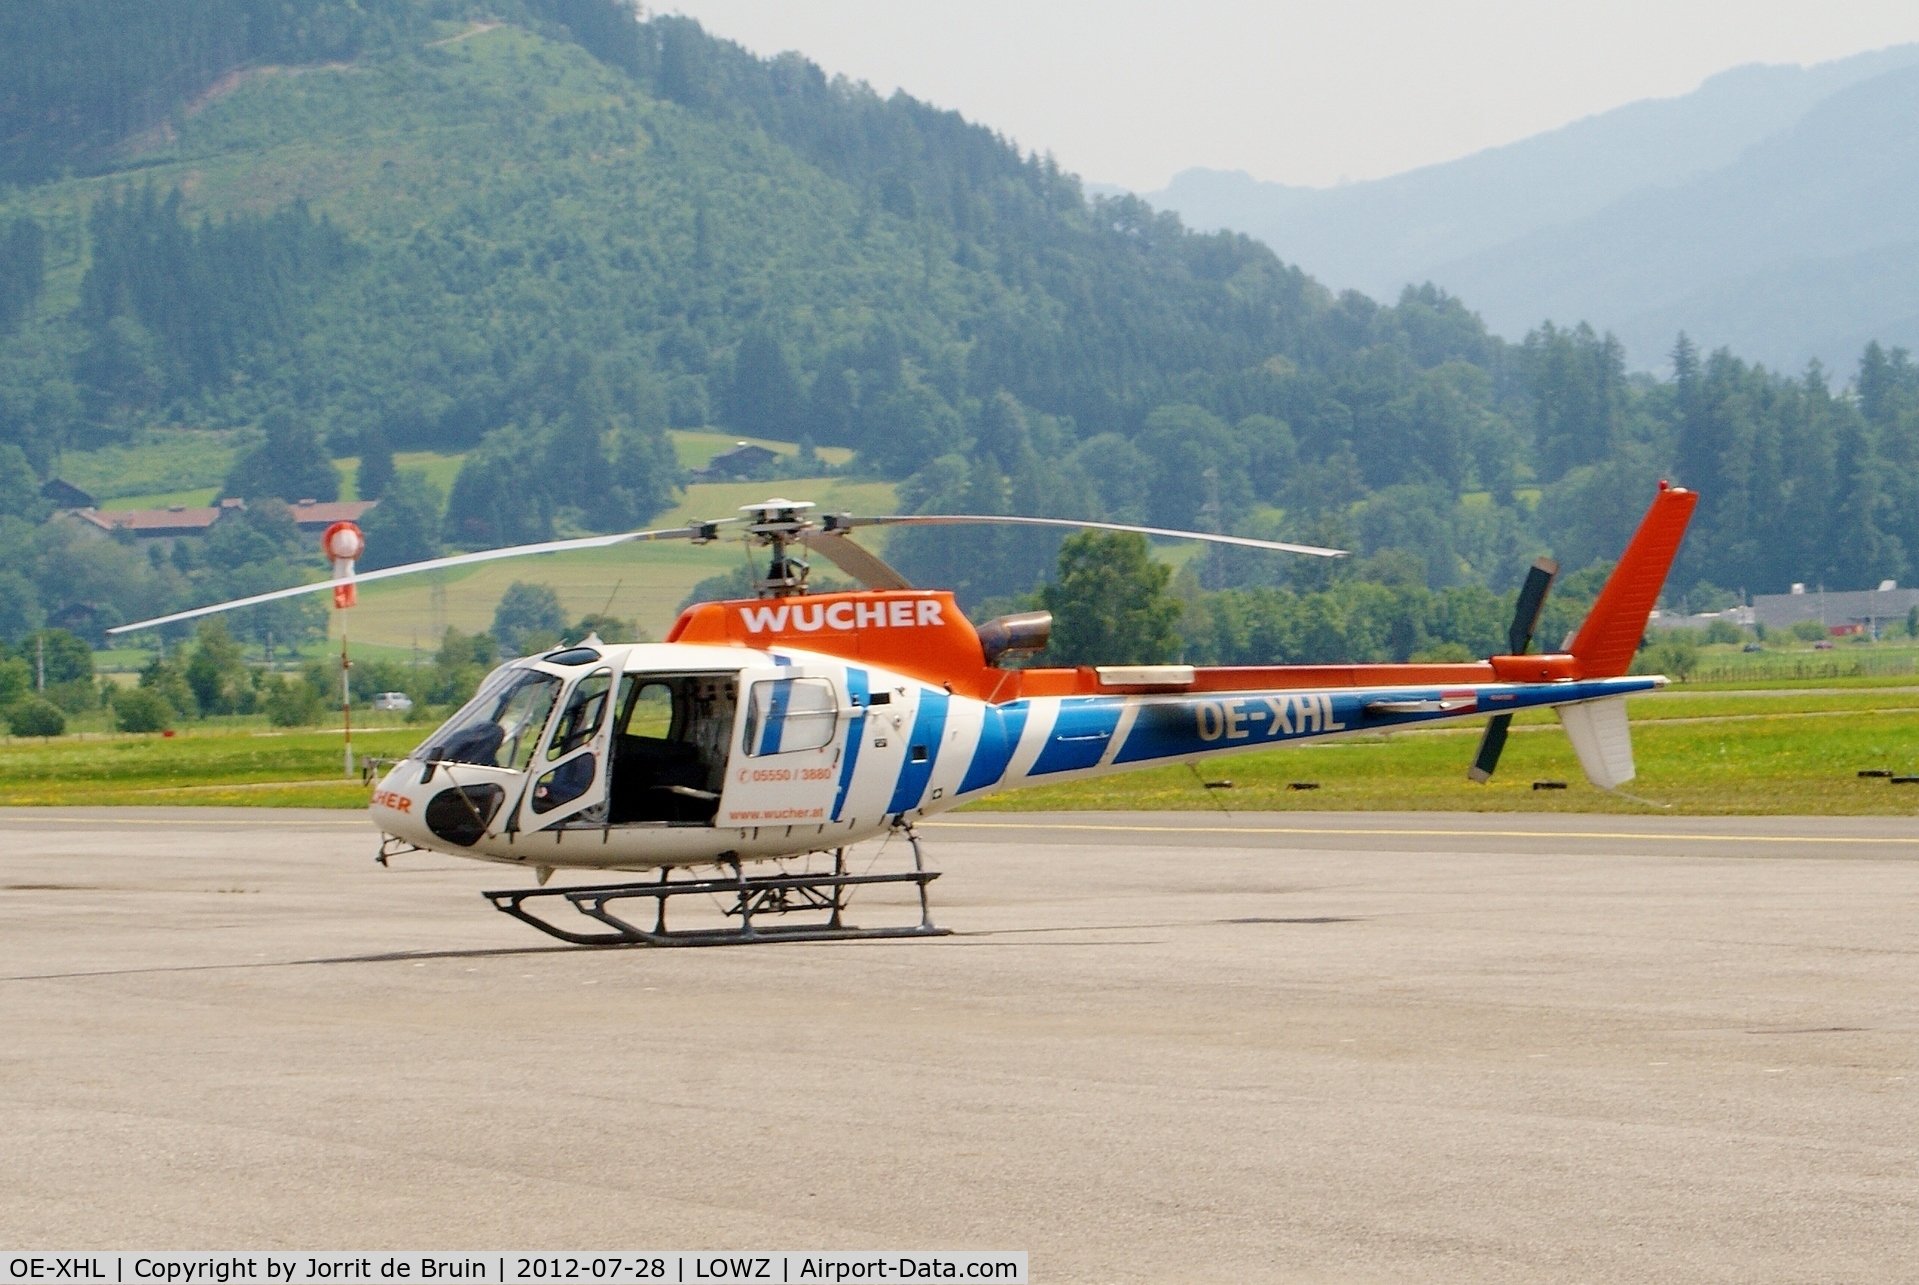 OE-XHL, 2004 Eurocopter AS-350B-3 Ecureuil Ecureuil C/N 3937, The Eurocopter of Wucher has just arrived after a beautiful sightseeing flight overhead the Alps. The doors are still open, because of the high outside temperature of 30 degrees centigrade.